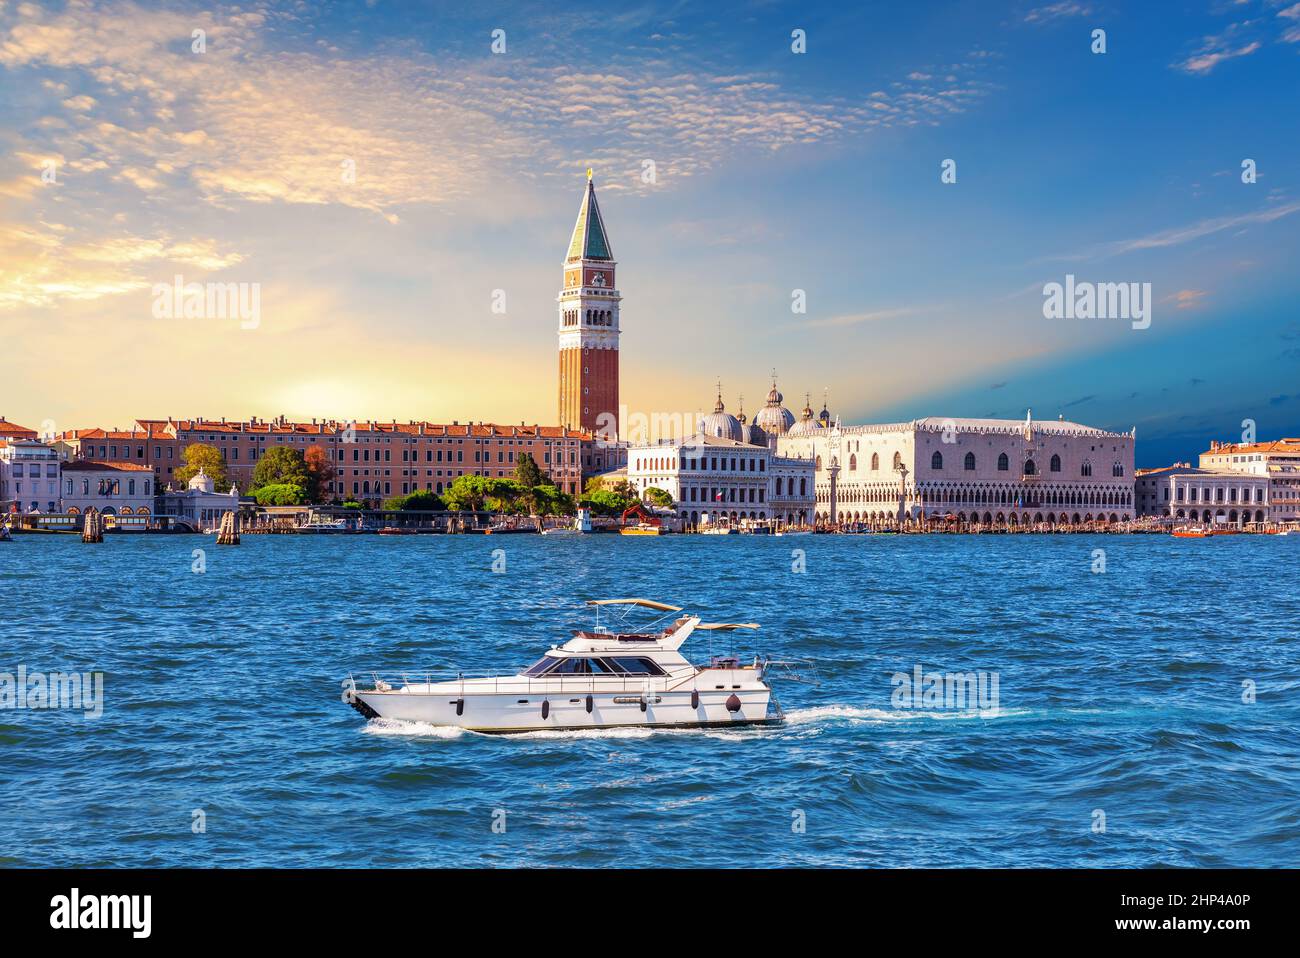 Venice Lagoon with a boat and famous places of interest, Italy. Stock Photo